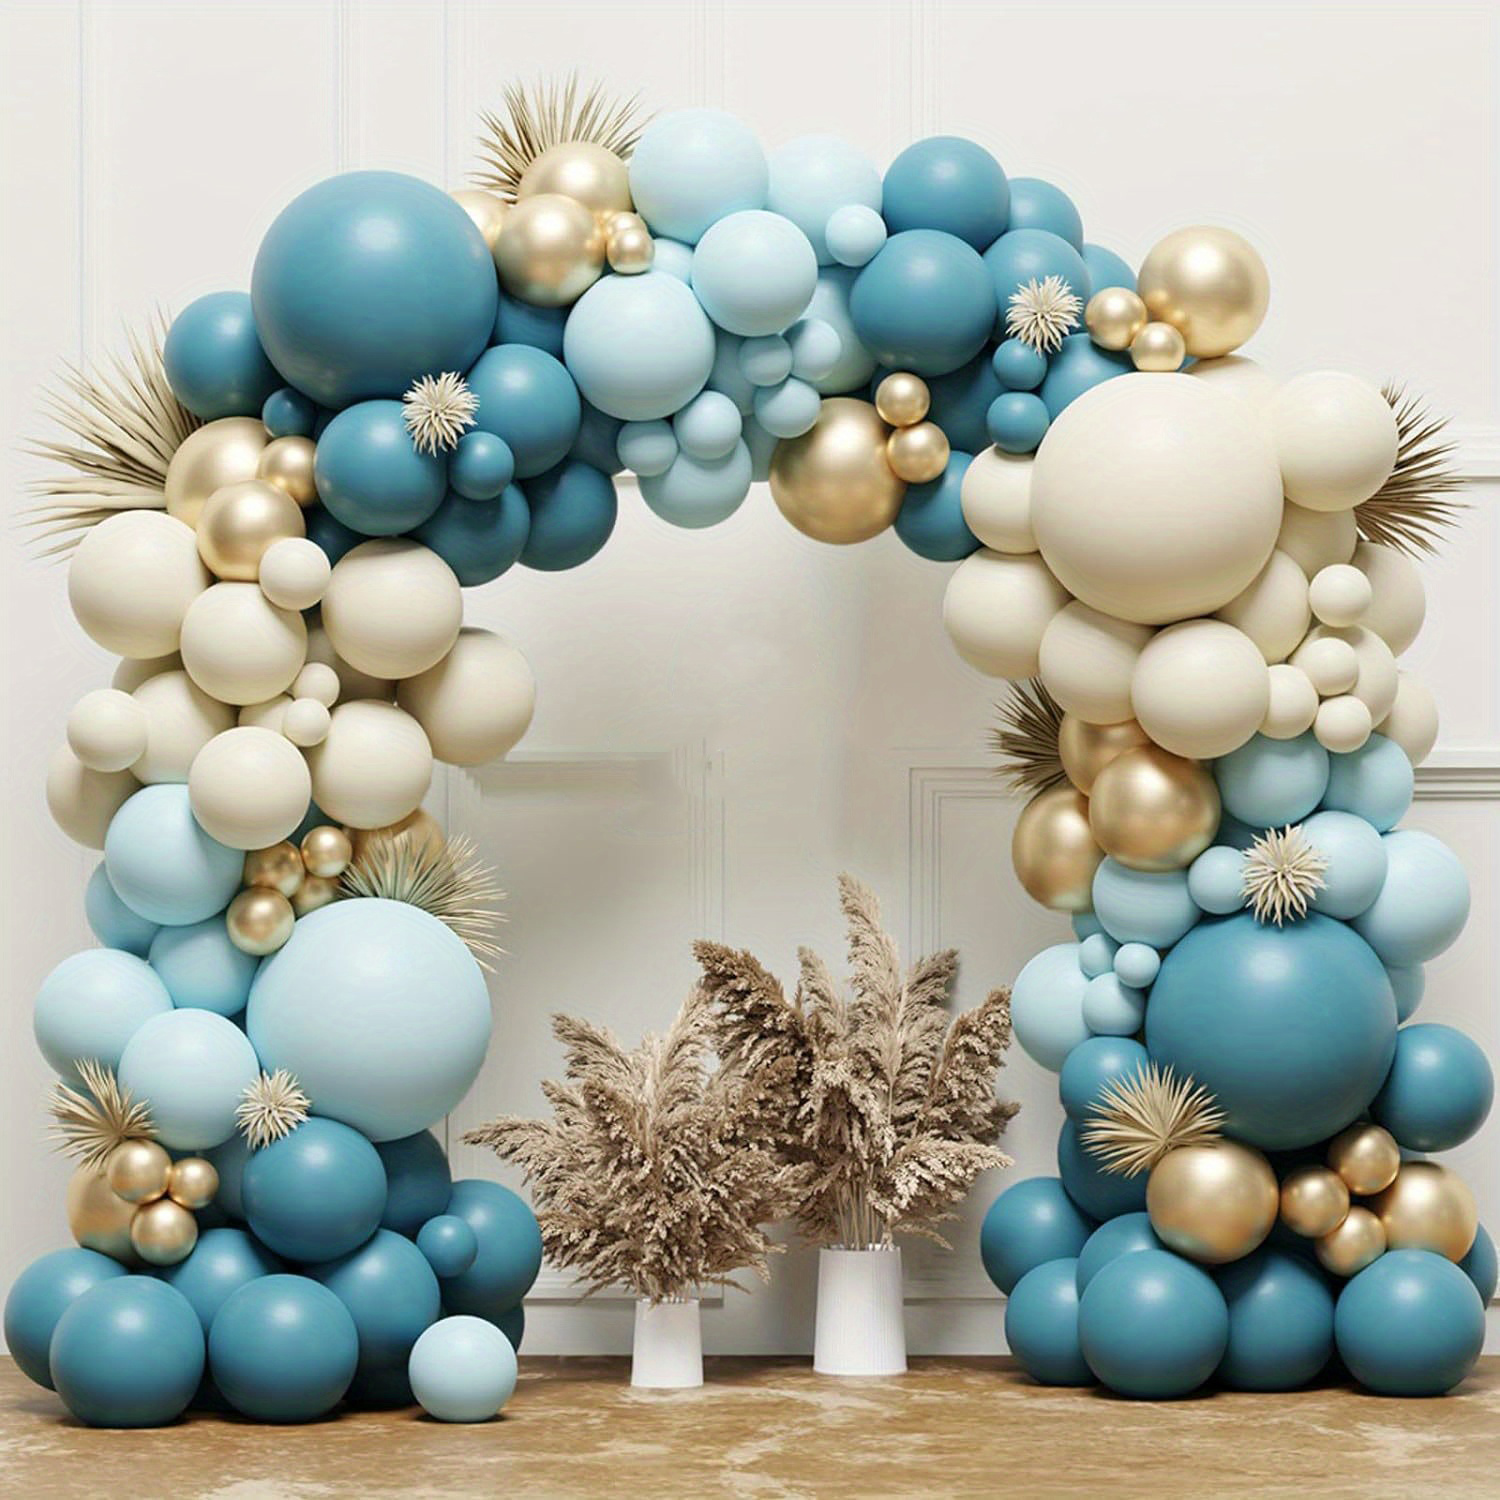 

112-piece Blue & Metallic Balloon Garland Set With Beige White Sand - Ideal For Birthdays, Baby Showers, And Celebrations - High-quality Latex Balloons, Simple Setup